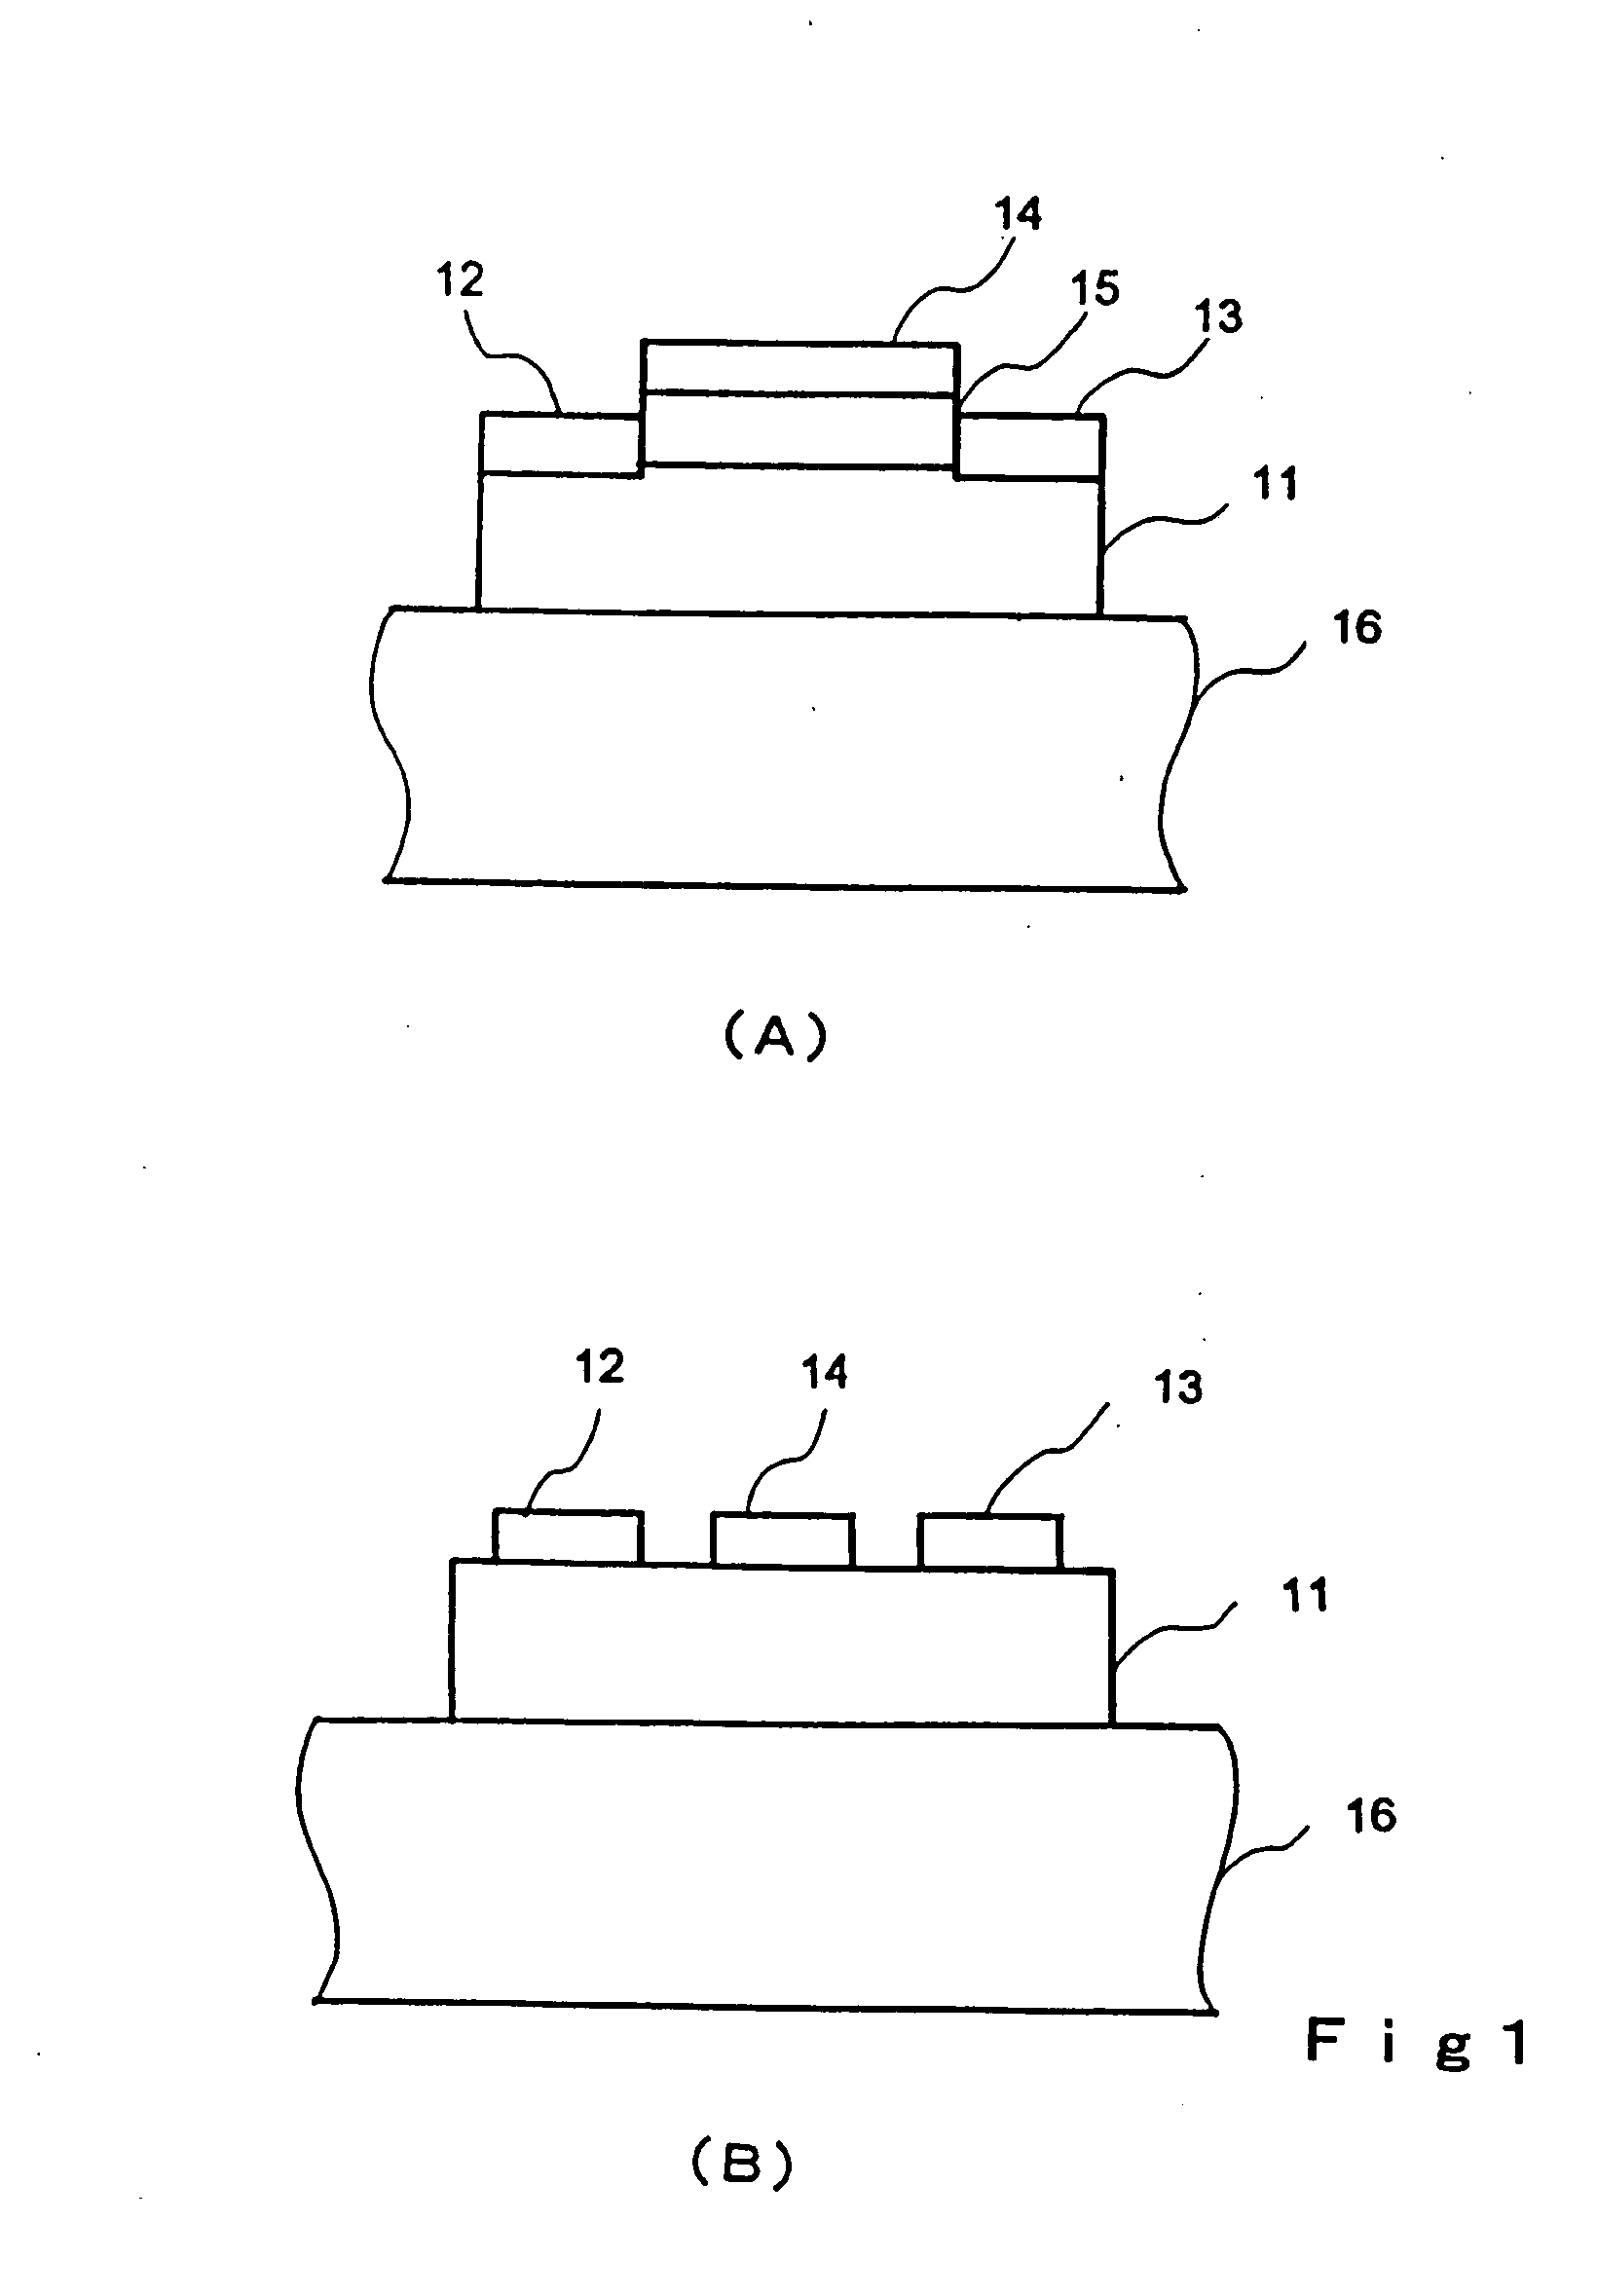 Transistor and semiconductor device